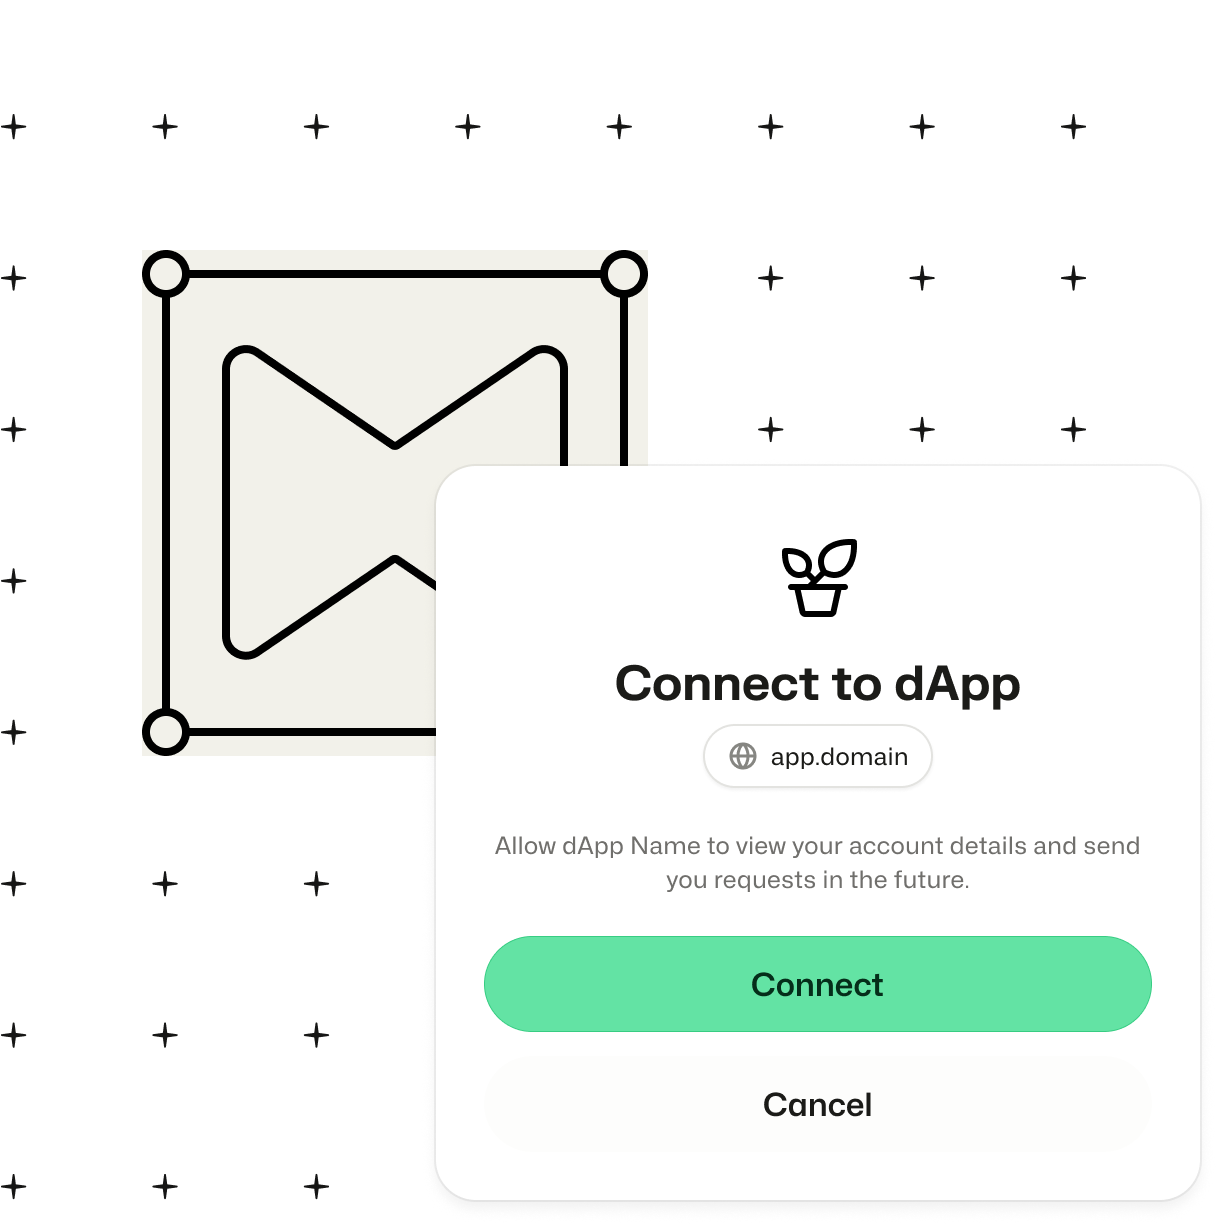 Illustration of the FastAuth UI showing the stage allowing user to connect their account to a dApp.